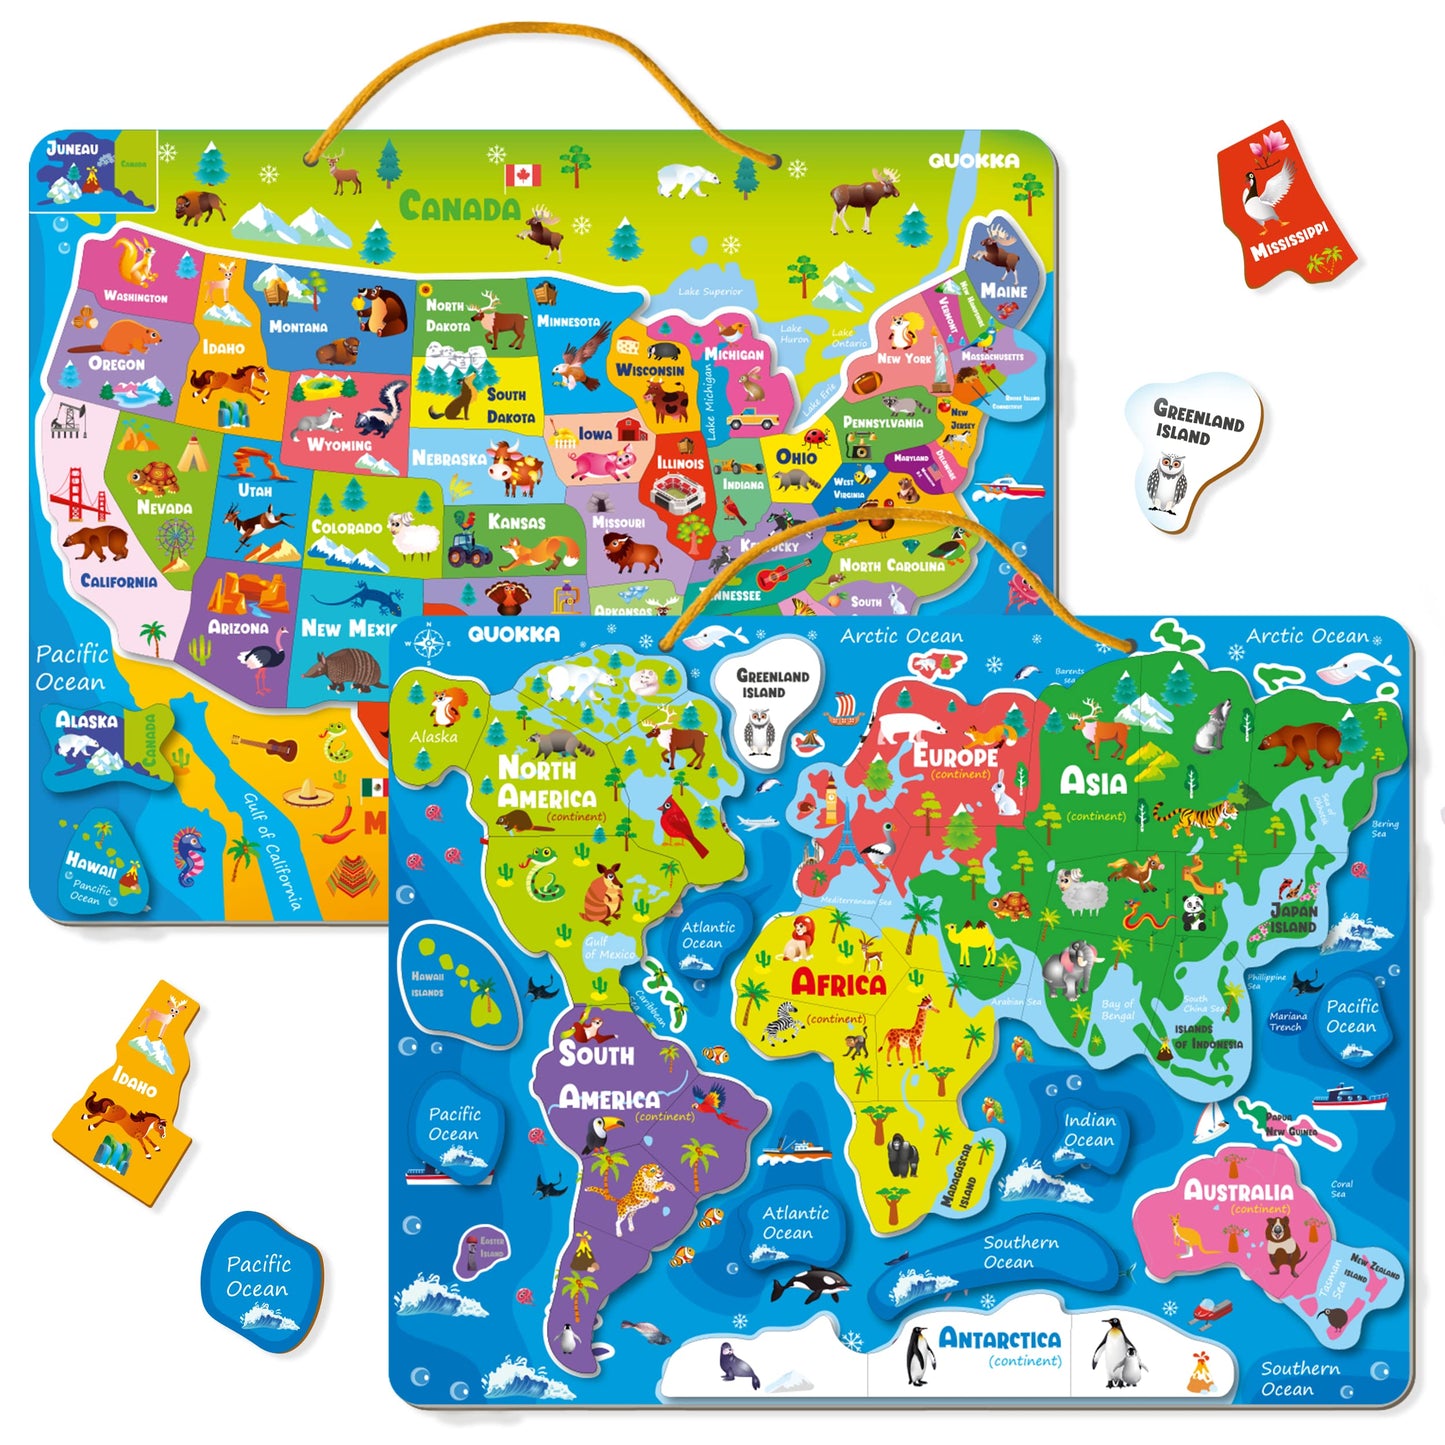 Magnetic Puzzles for Kids Ages 4-6 - 3 Educational Travel Games for Toddlers 3-5 Year Olds by QUOKKA - Space, USA and World Map Learning Toys for Boy and Girl 6-8 Learn United States